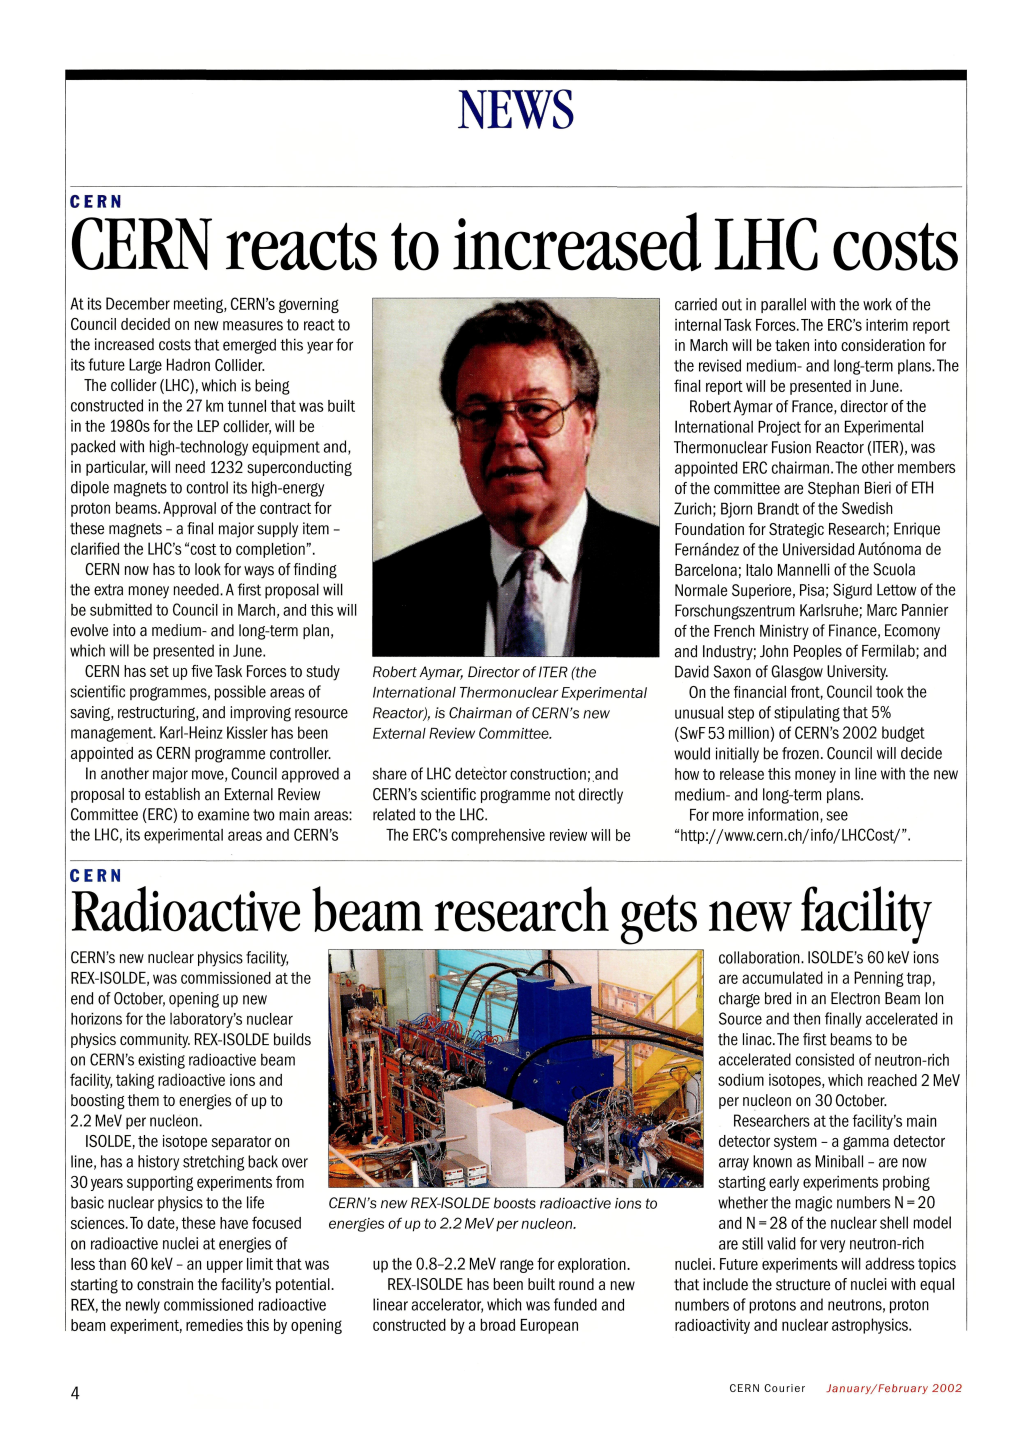 CERN Reacts to Increased LHC Costs